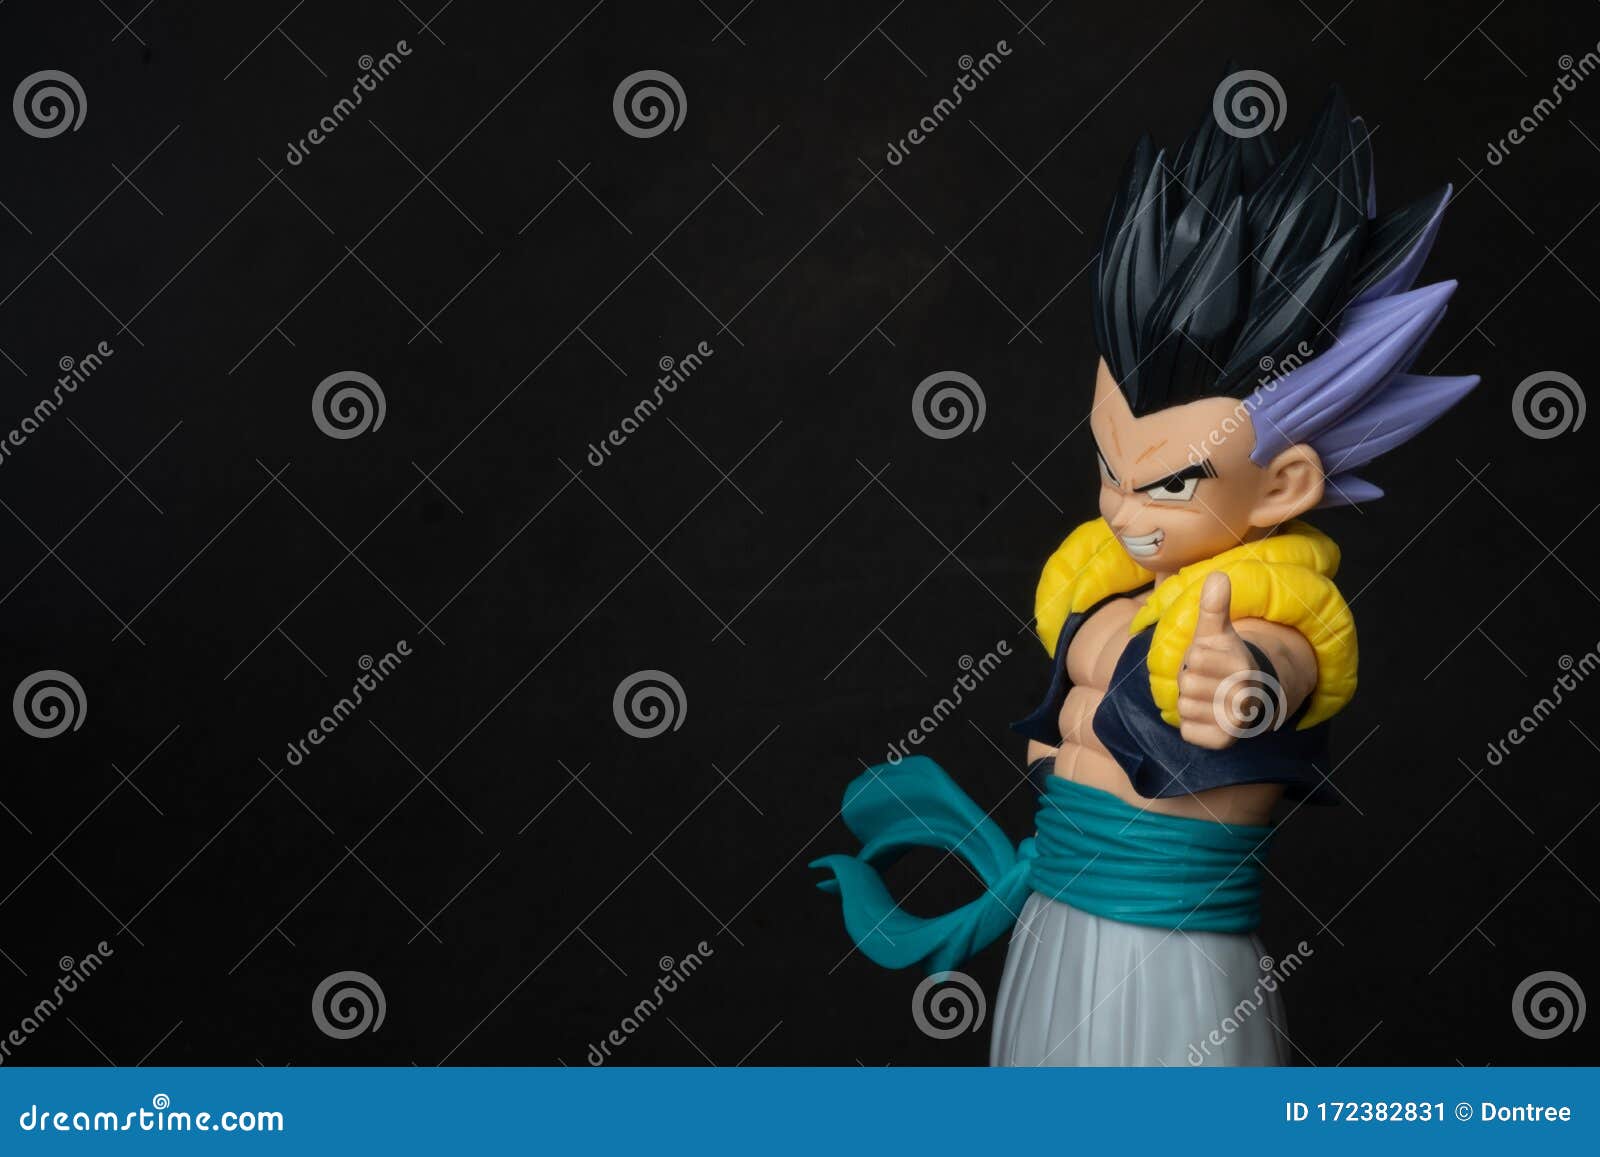 2 209 Dragon Ball Photos Free Royalty Free Stock Photos From Dreamstime